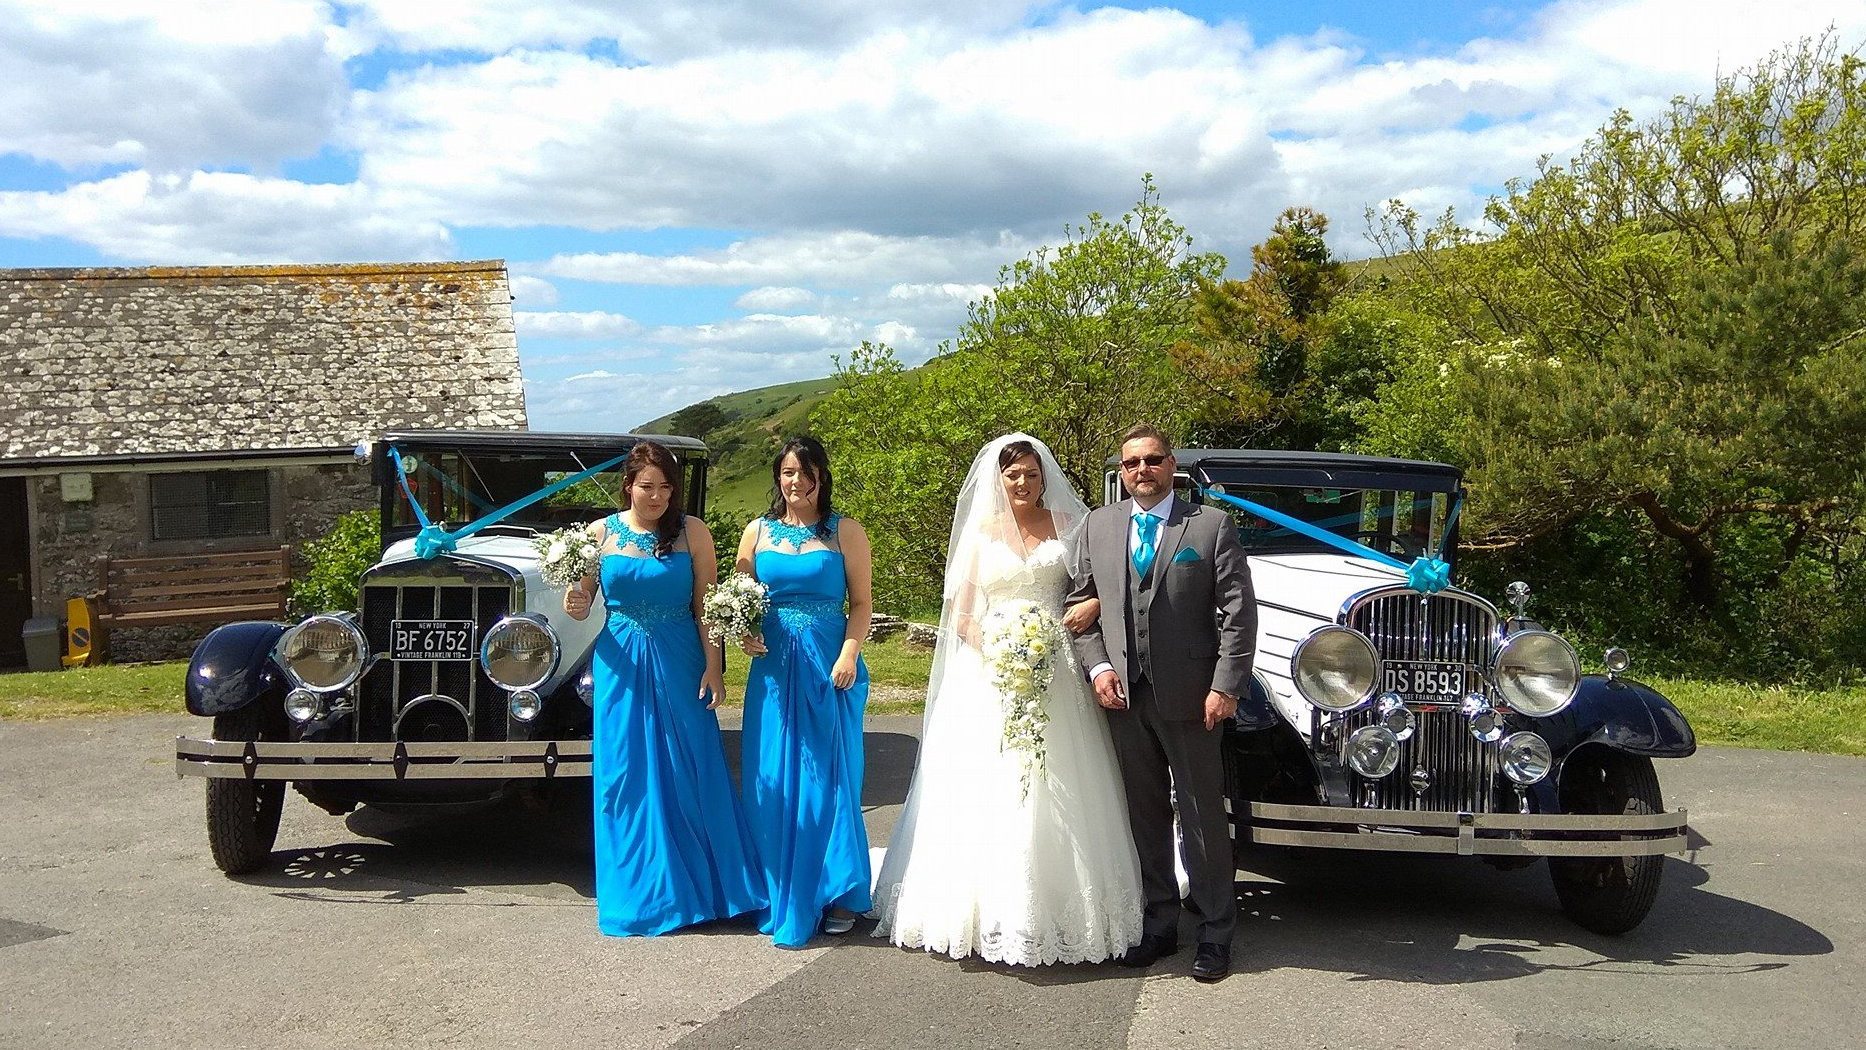 Pair of identical american vintage car with matching Turquoise blue ribbons. Bride, Groom and two bridesmaids standing in front of the vehicles